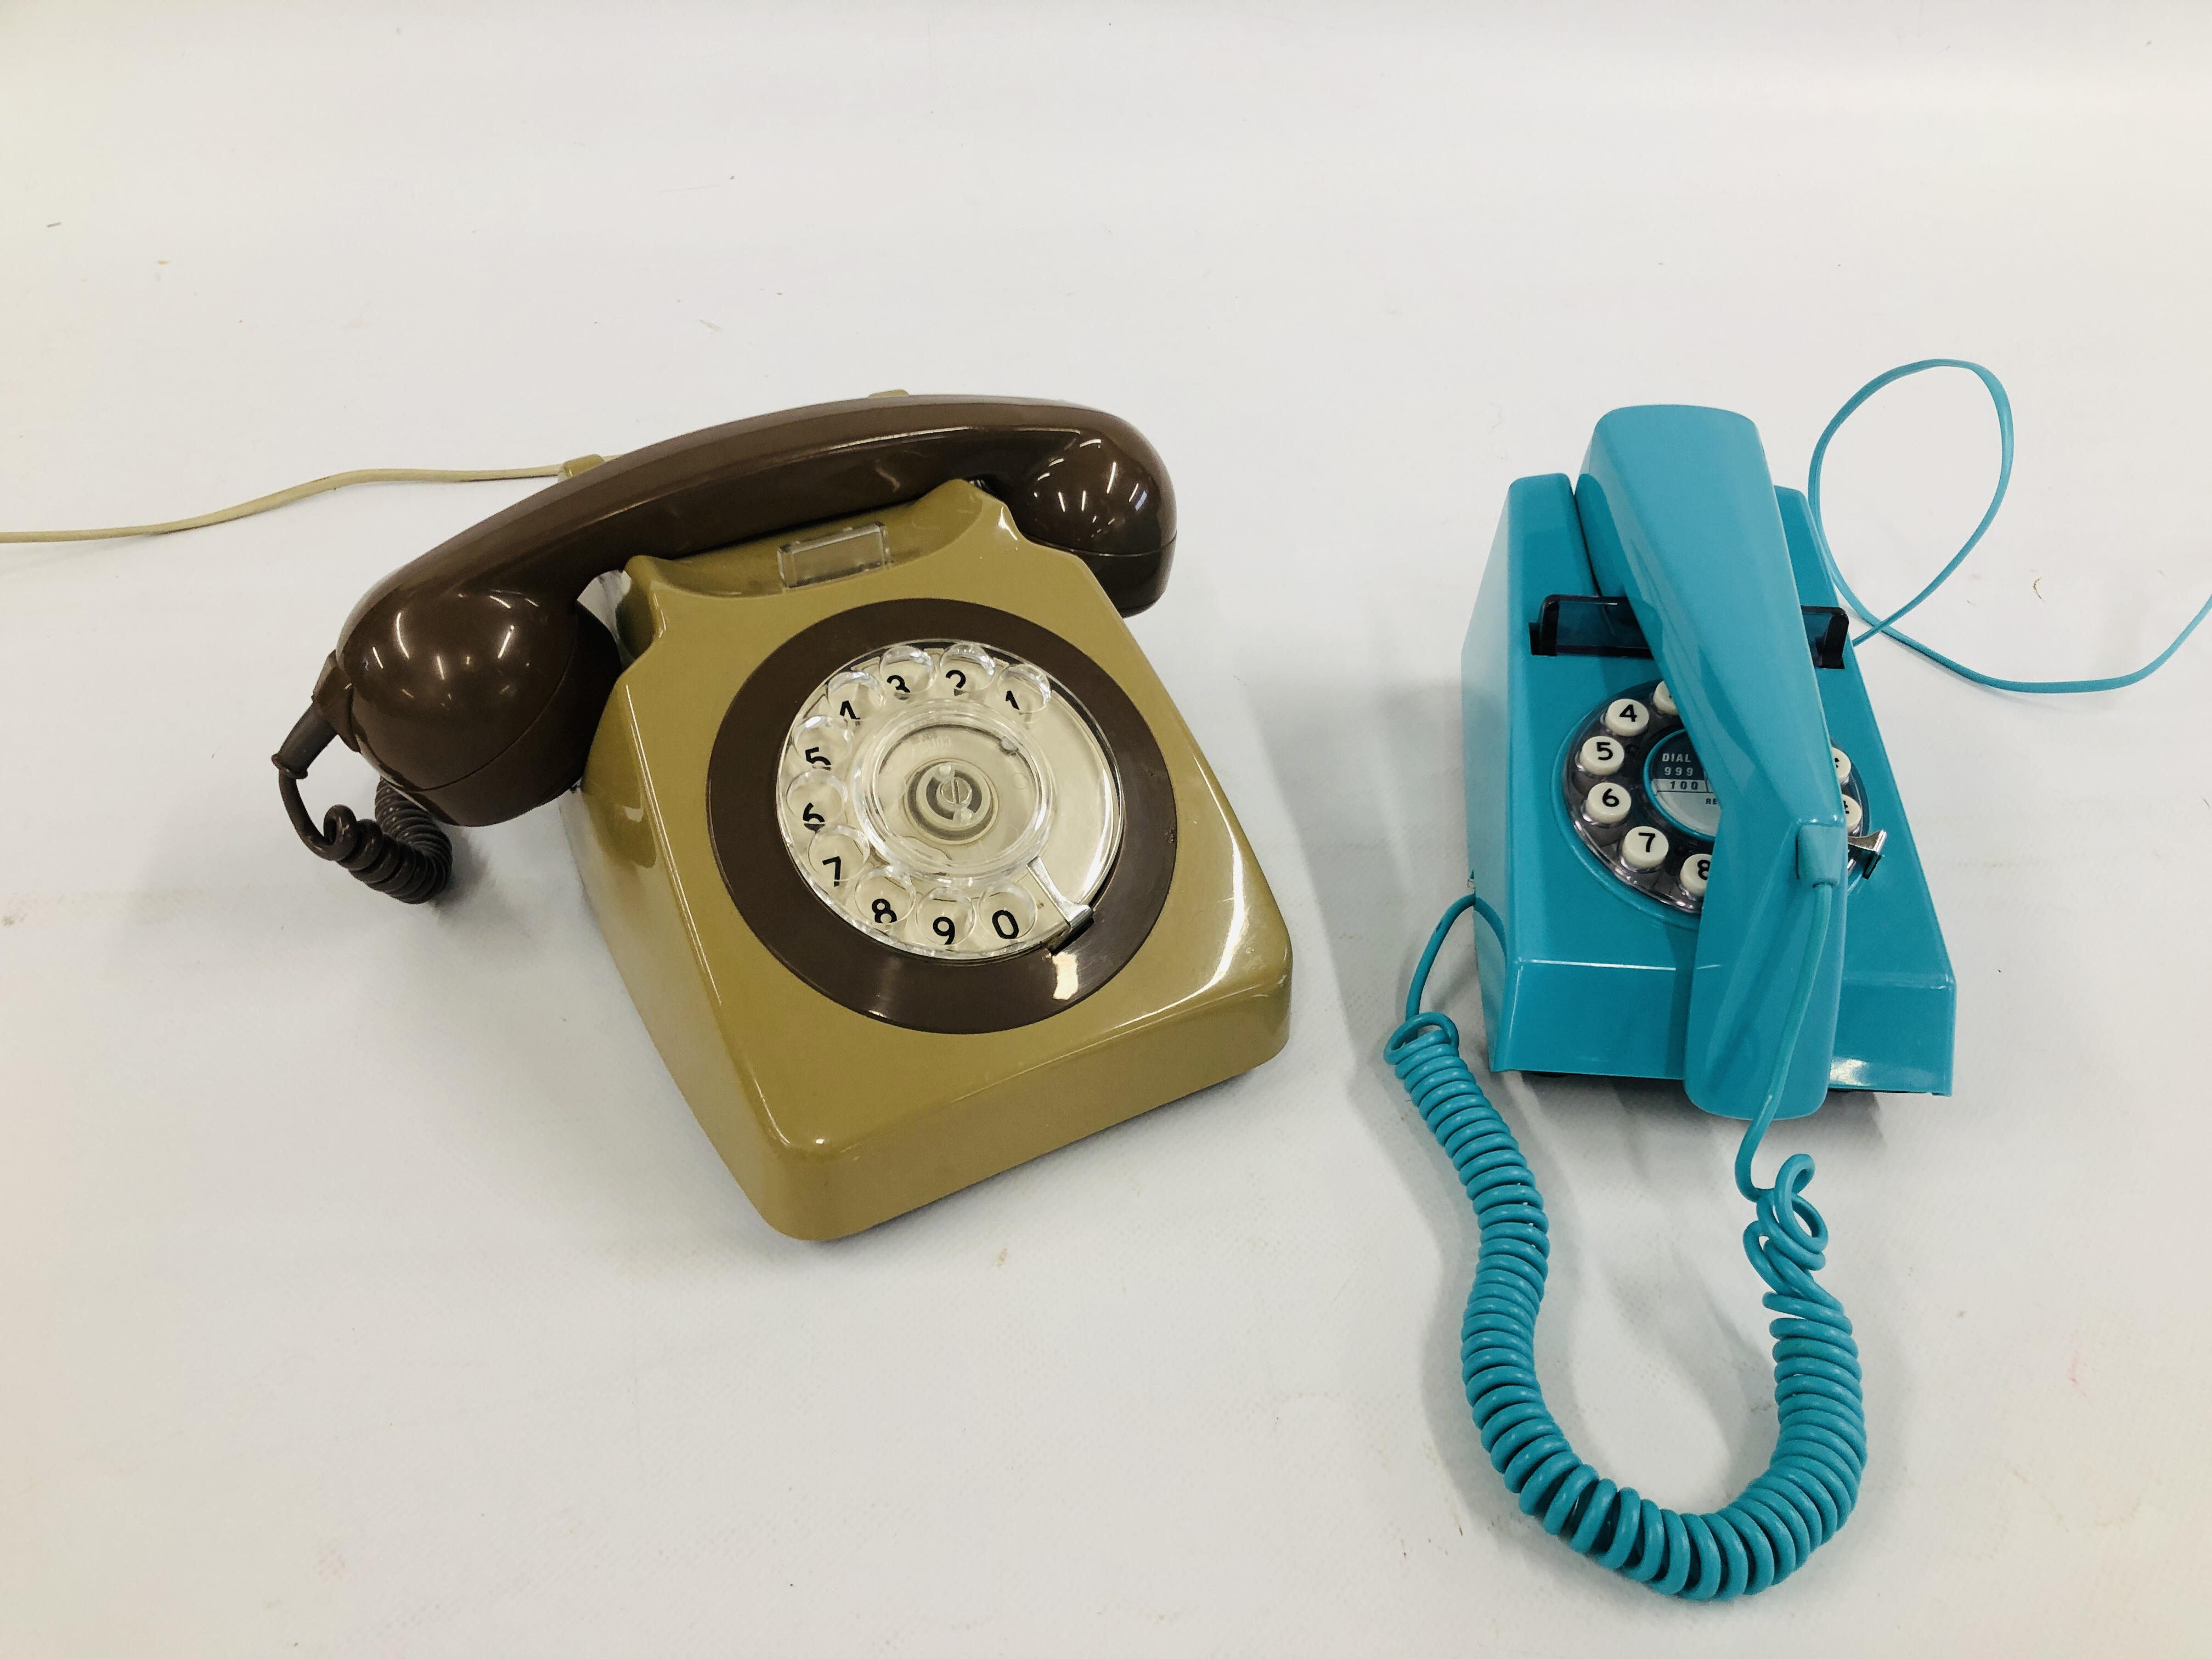 A VINTAGE TELEPHONE AND VINTAGE STYLE TRIMPHONE TELEPHONE